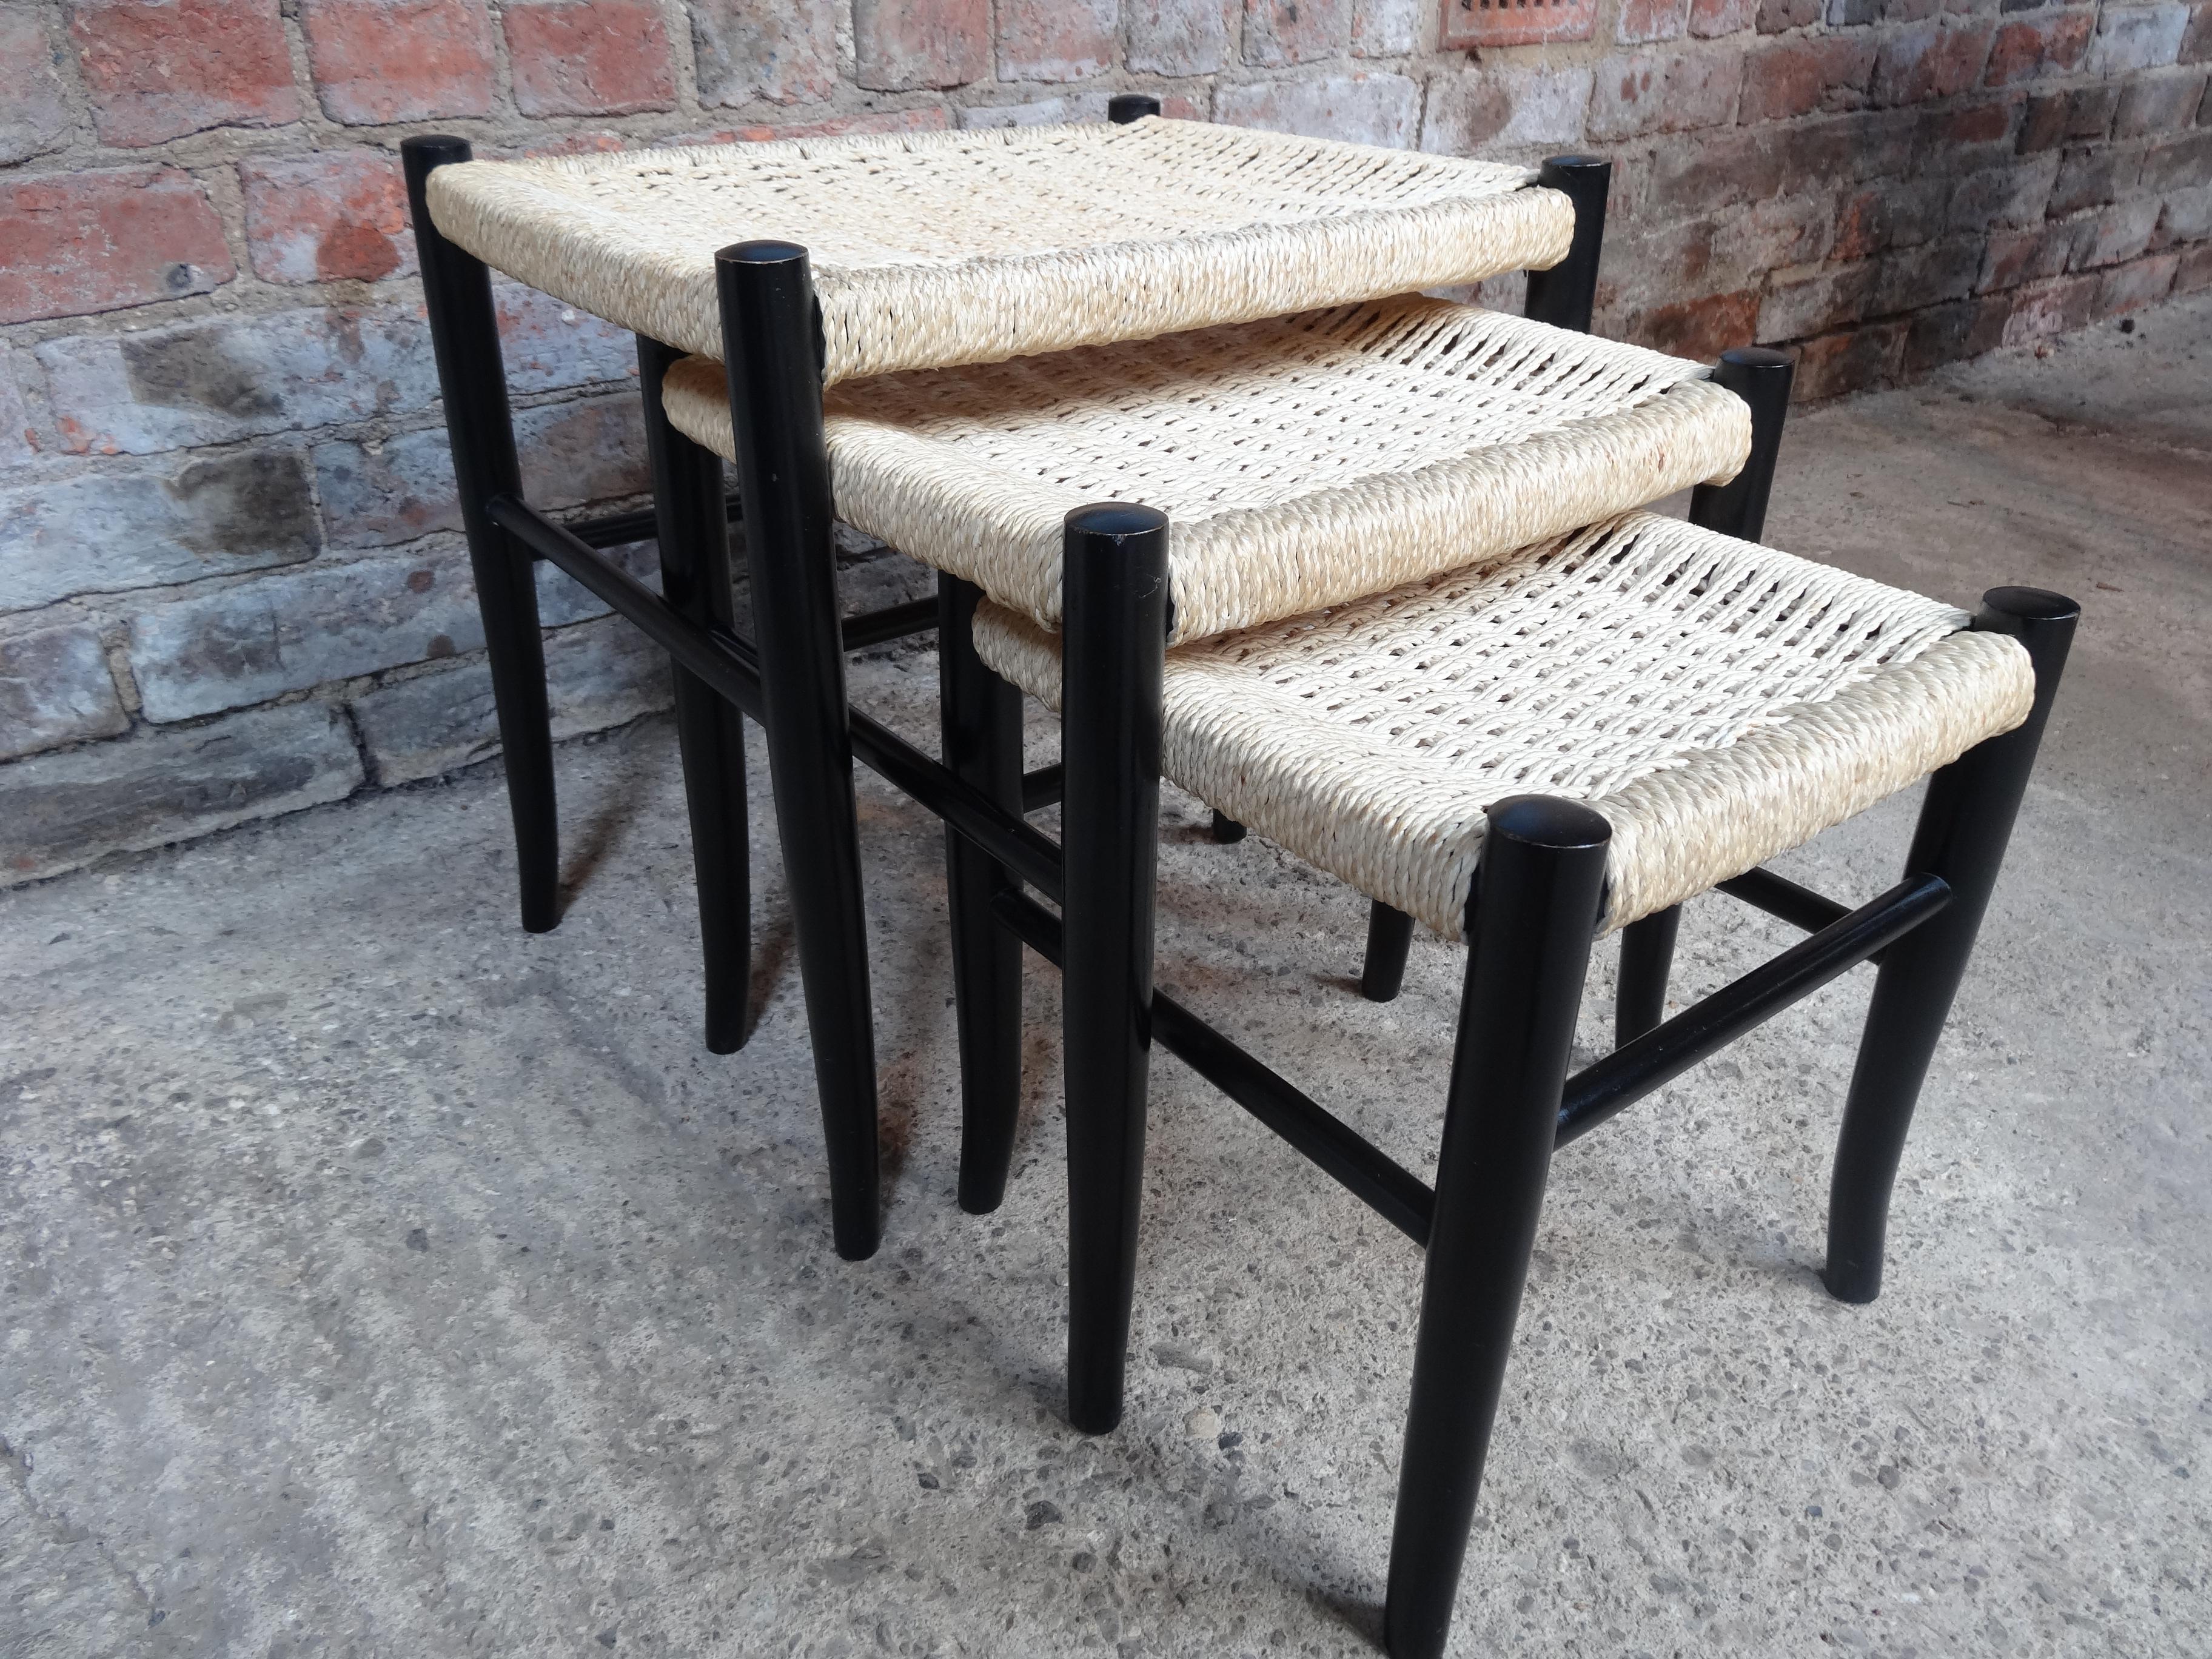 Ebonized Danish Cord Vintage Retro 1960's Nest of Stools / Tables In Good Condition For Sale In Markington, GB